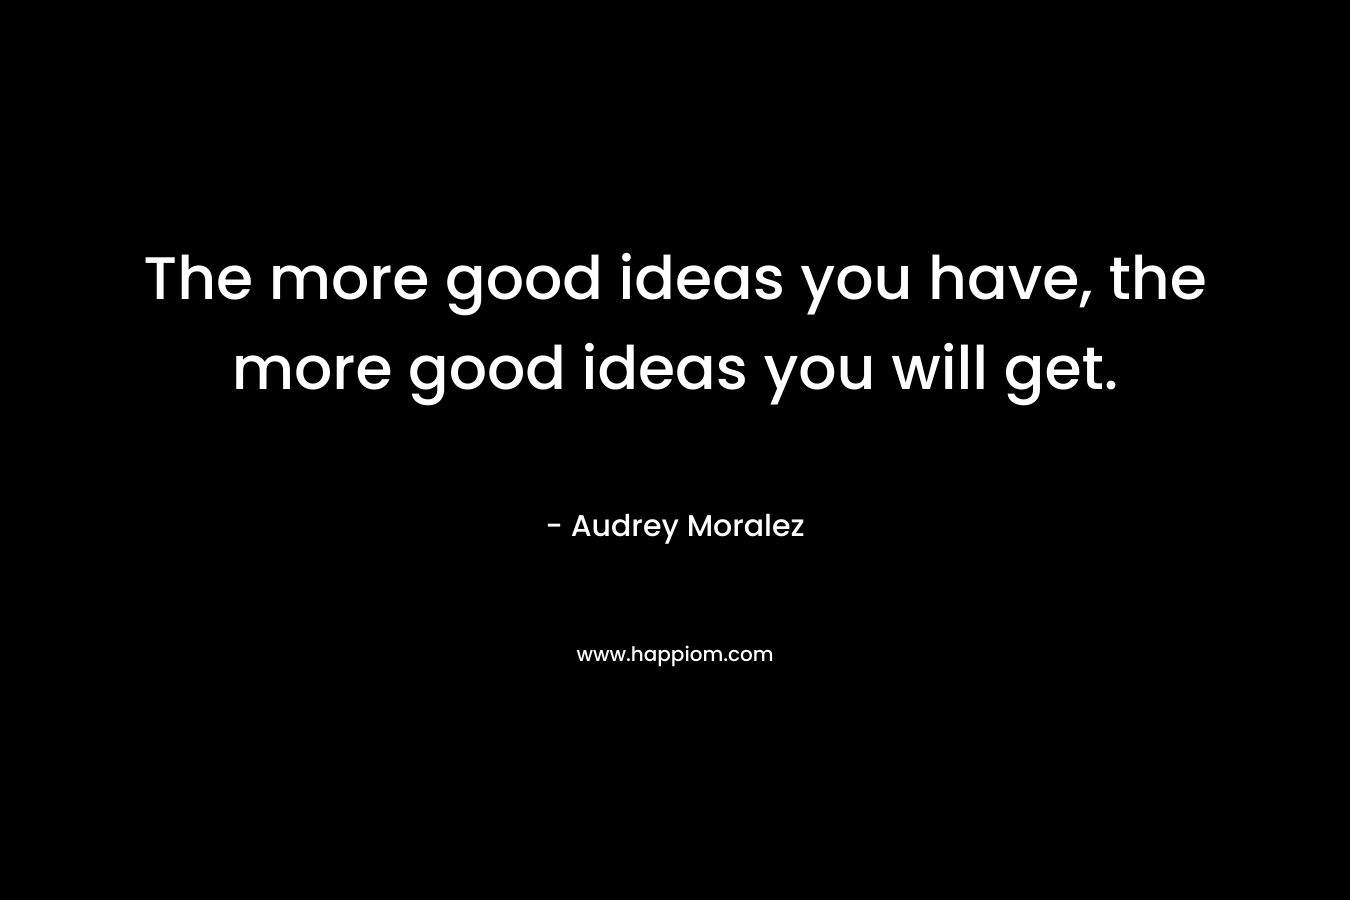 The more good ideas you have, the more good ideas you will get.